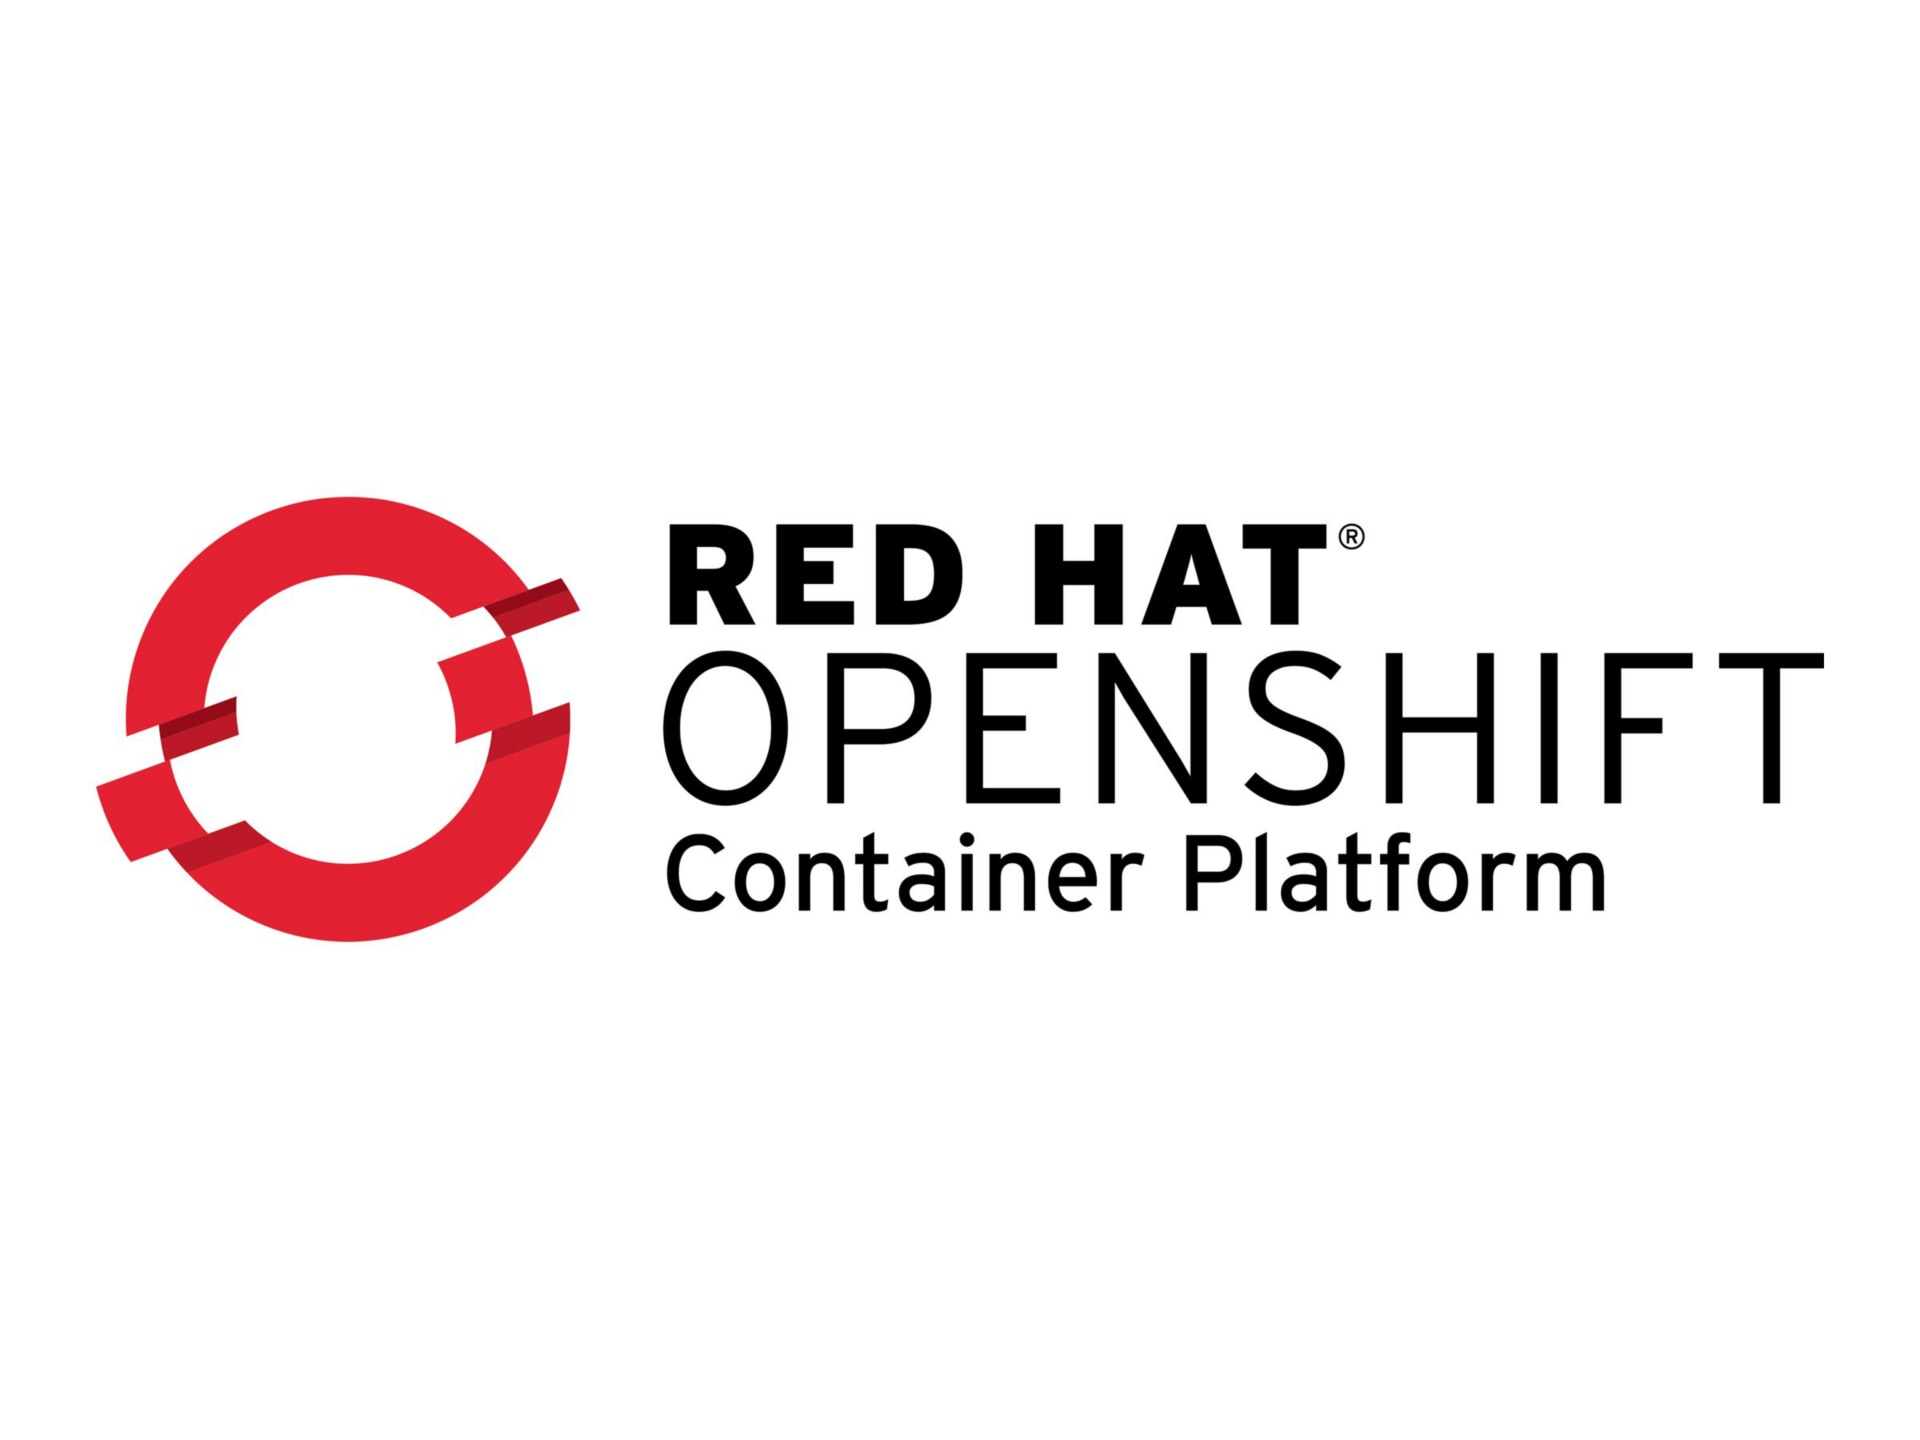 Red Hat OpenShift Container Platform - premium subscription (3 years) - 2 c